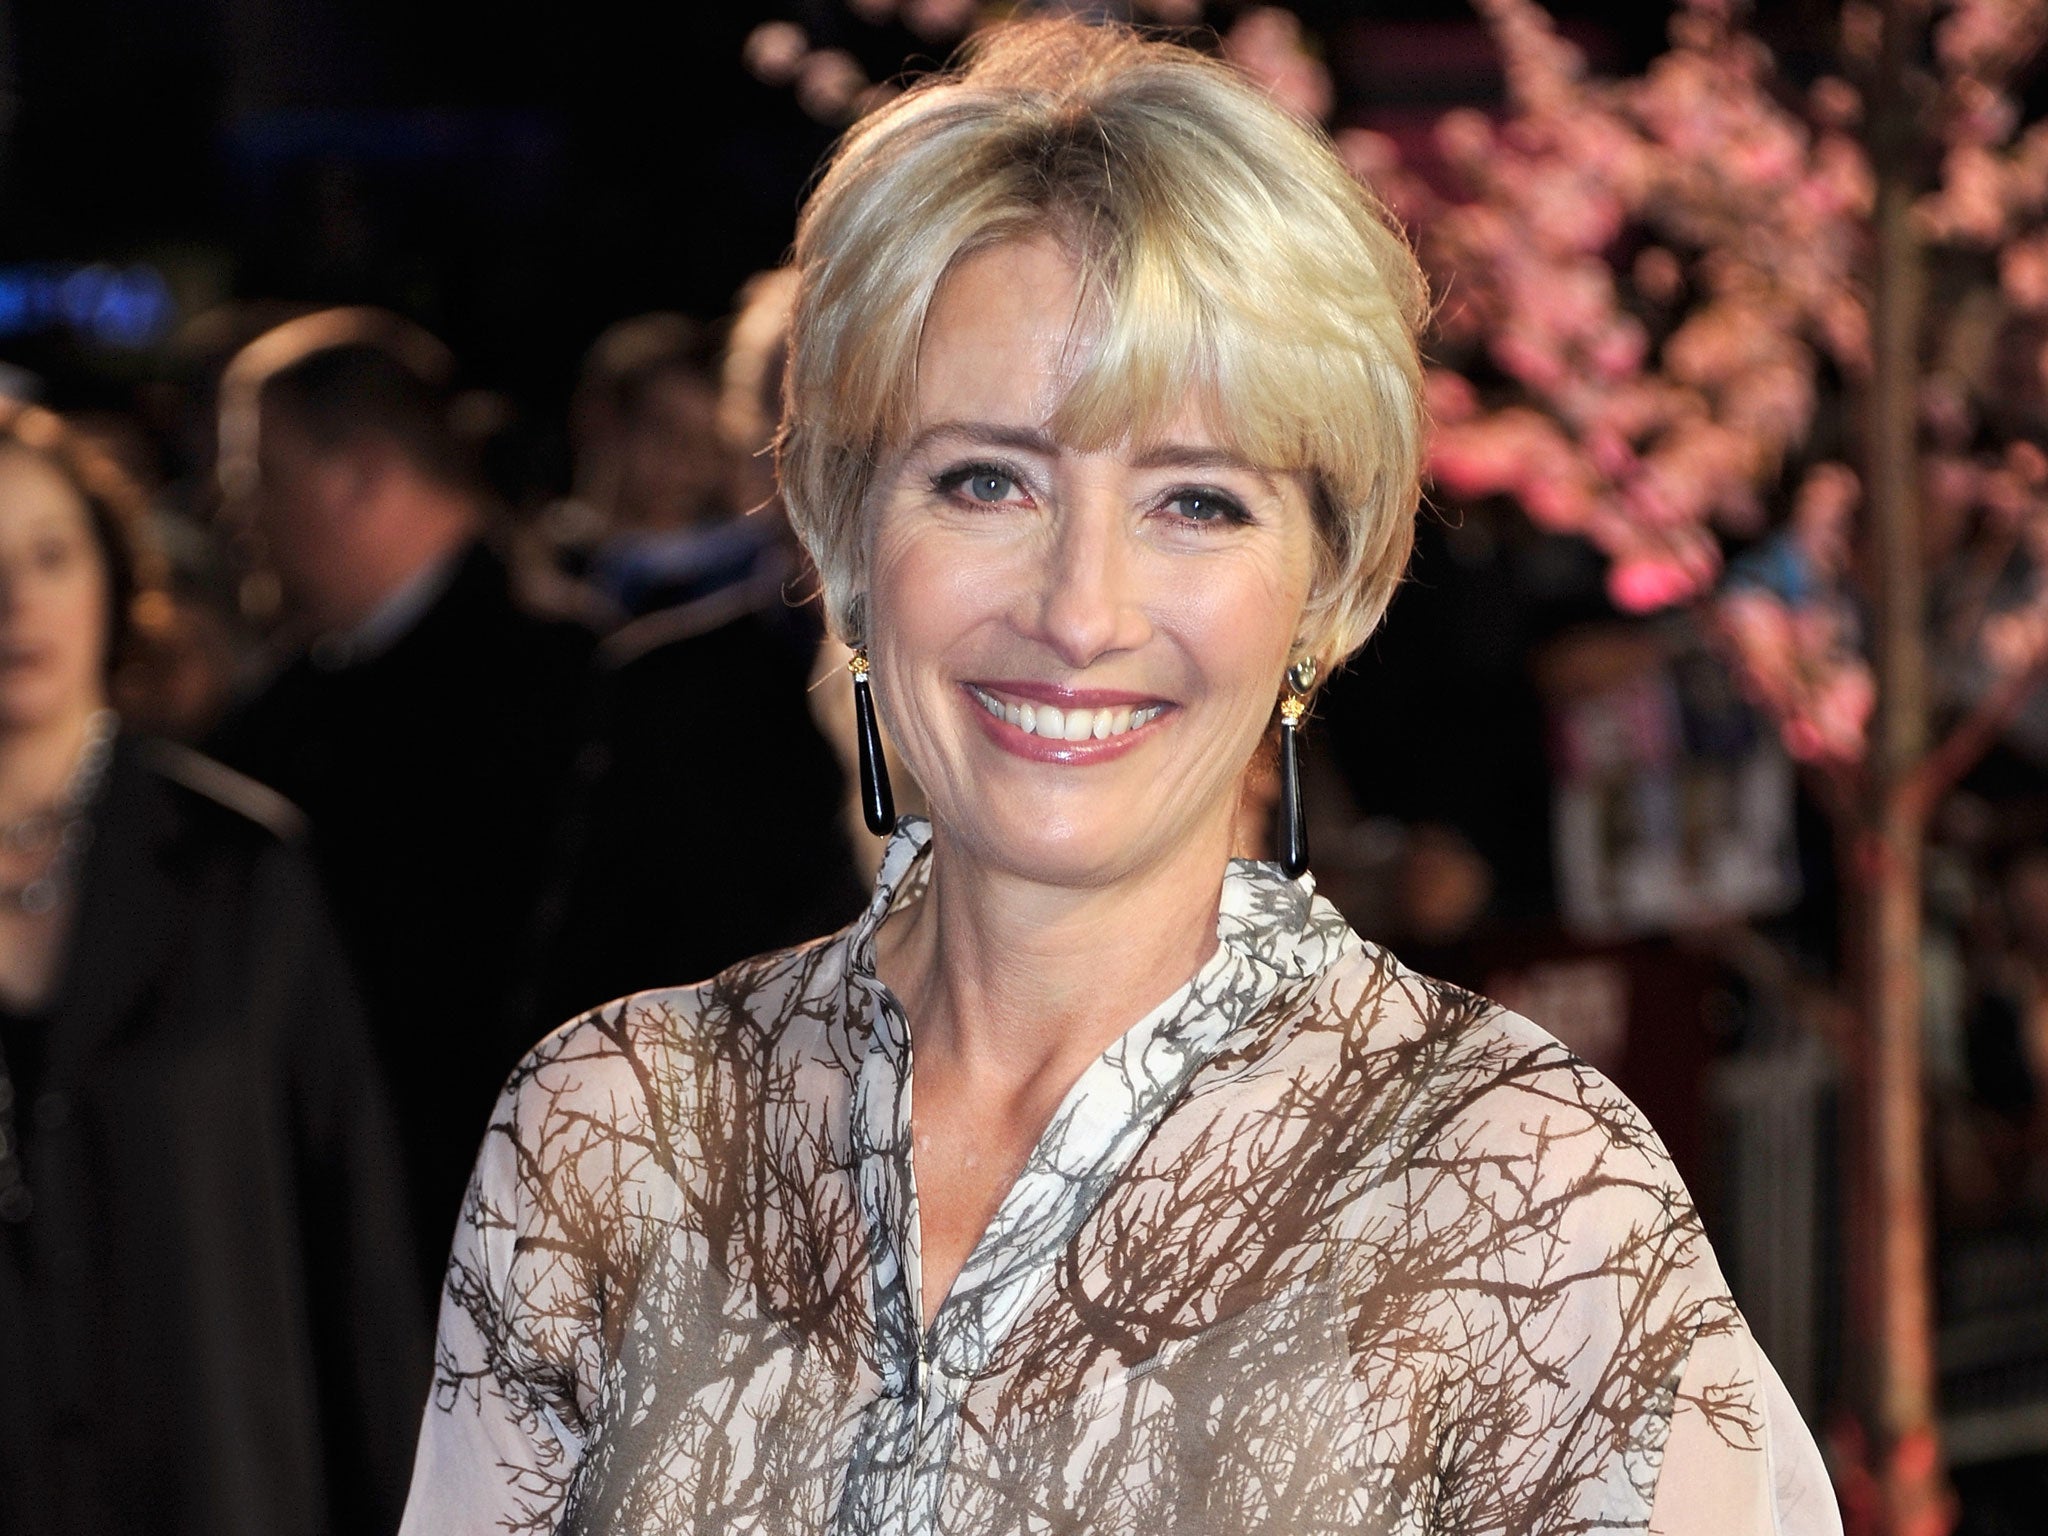 The role of 'nanny' seems to suit Emma Thompson